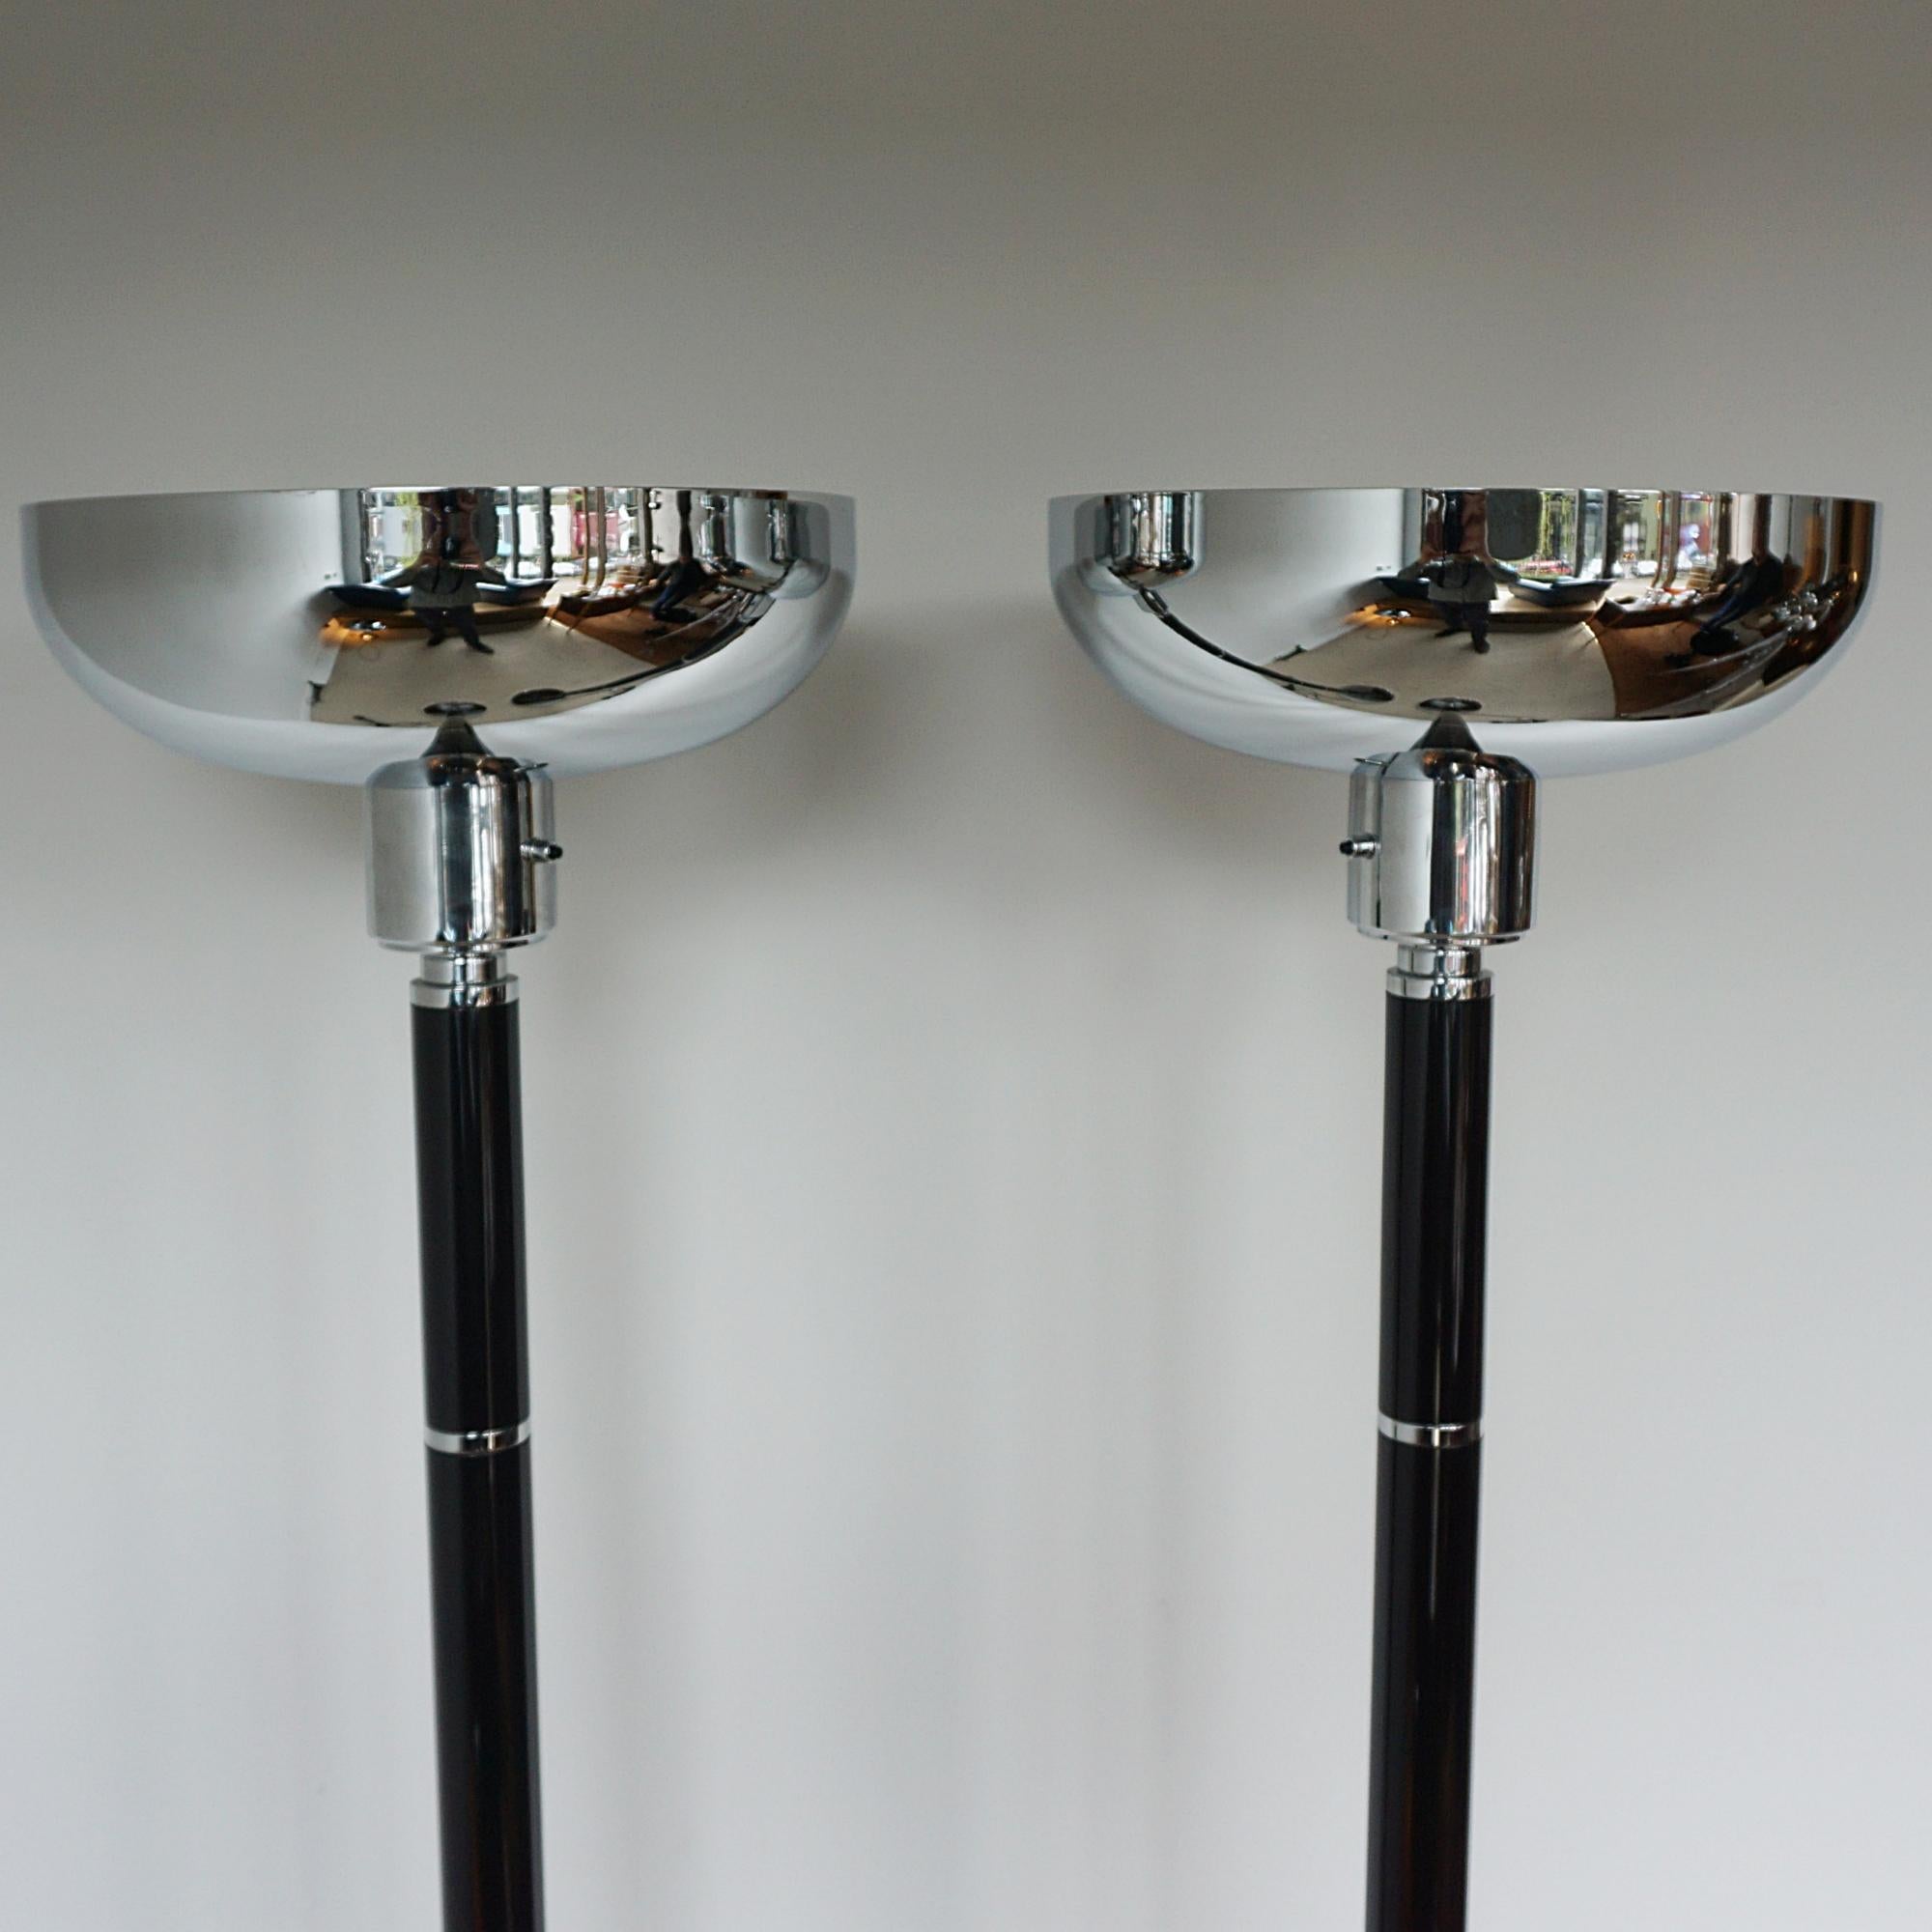 20th Century Pair of Art Deco Style Uplighter Floor Lamps  For Sale